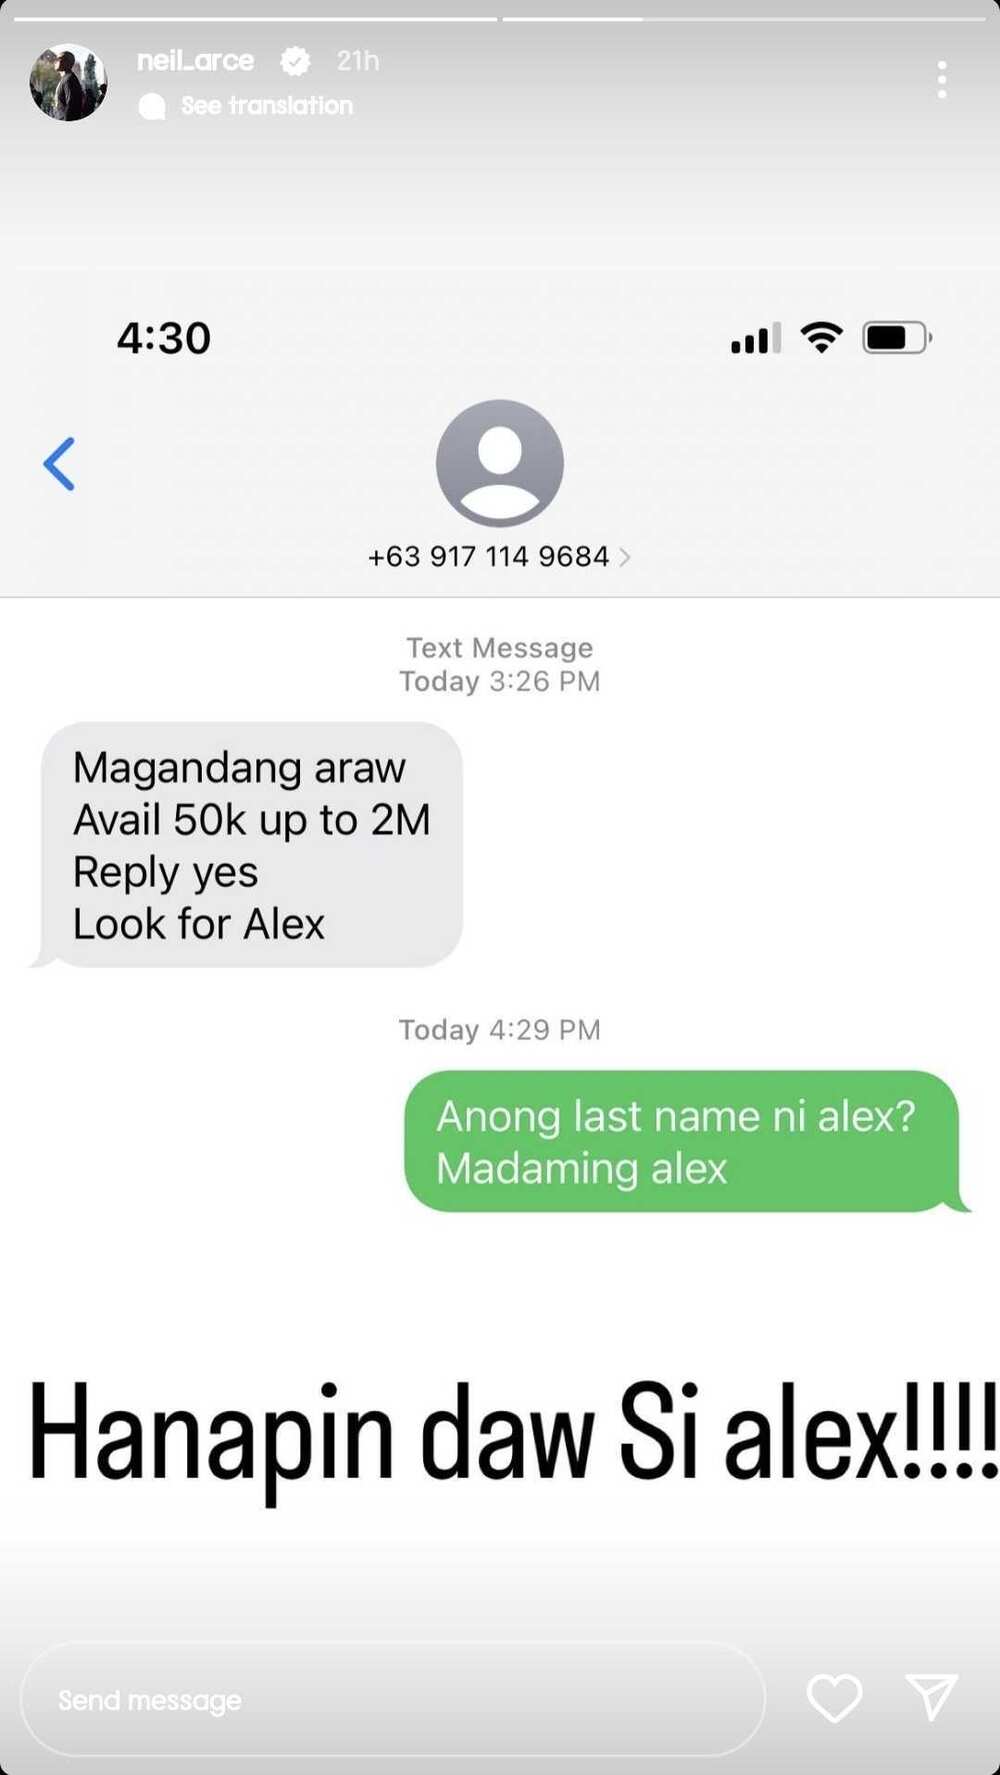 Neil Arce pokes fun at the text message he received: “Look for Alex”